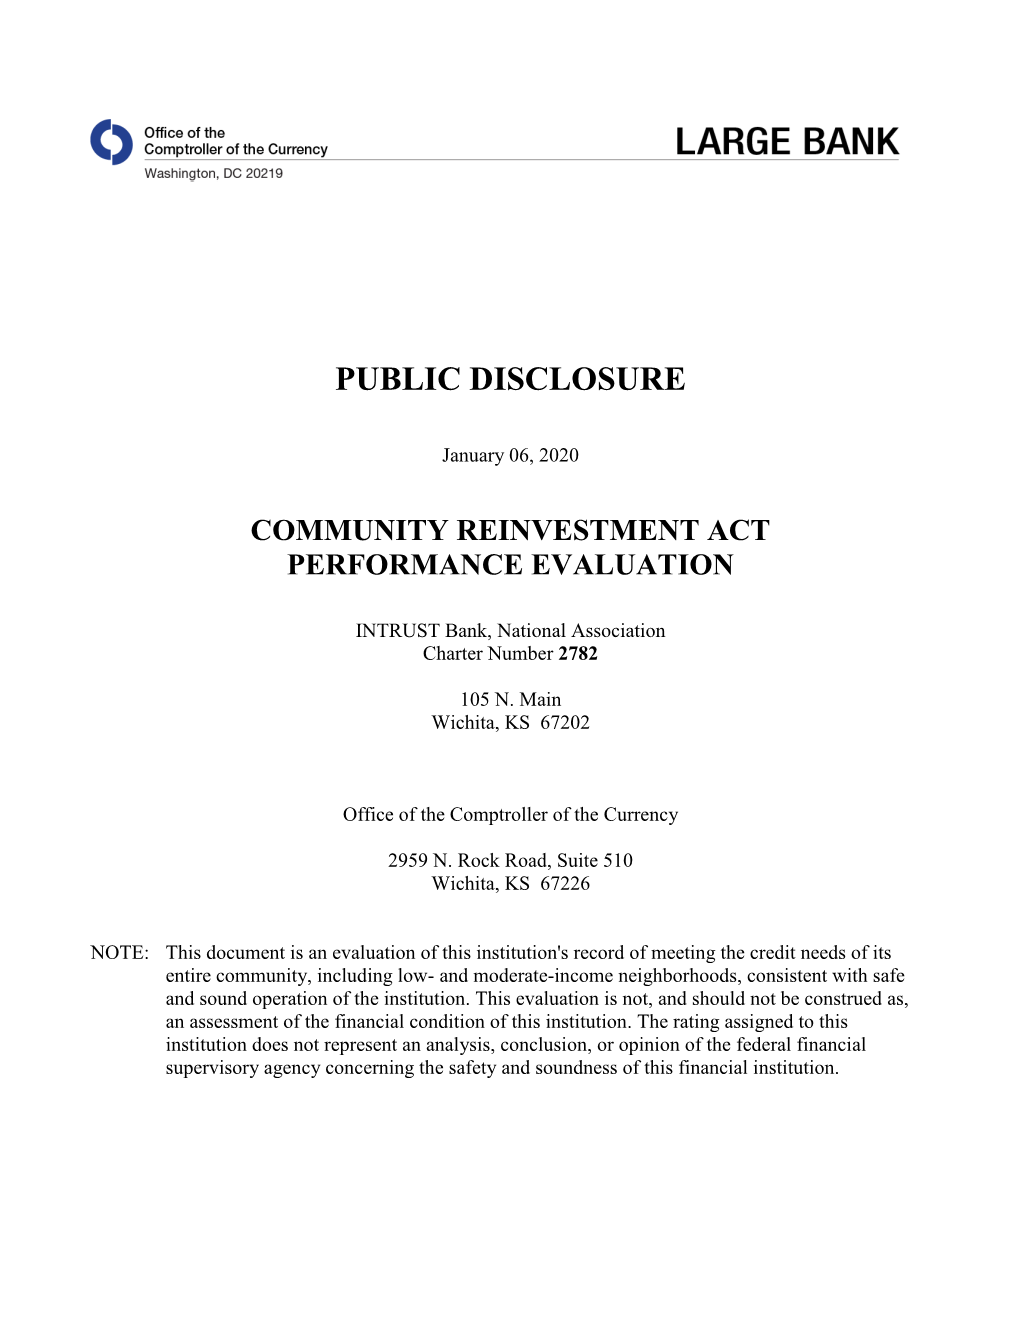 Community Reinvestment Act Performance Evaluation Charter No